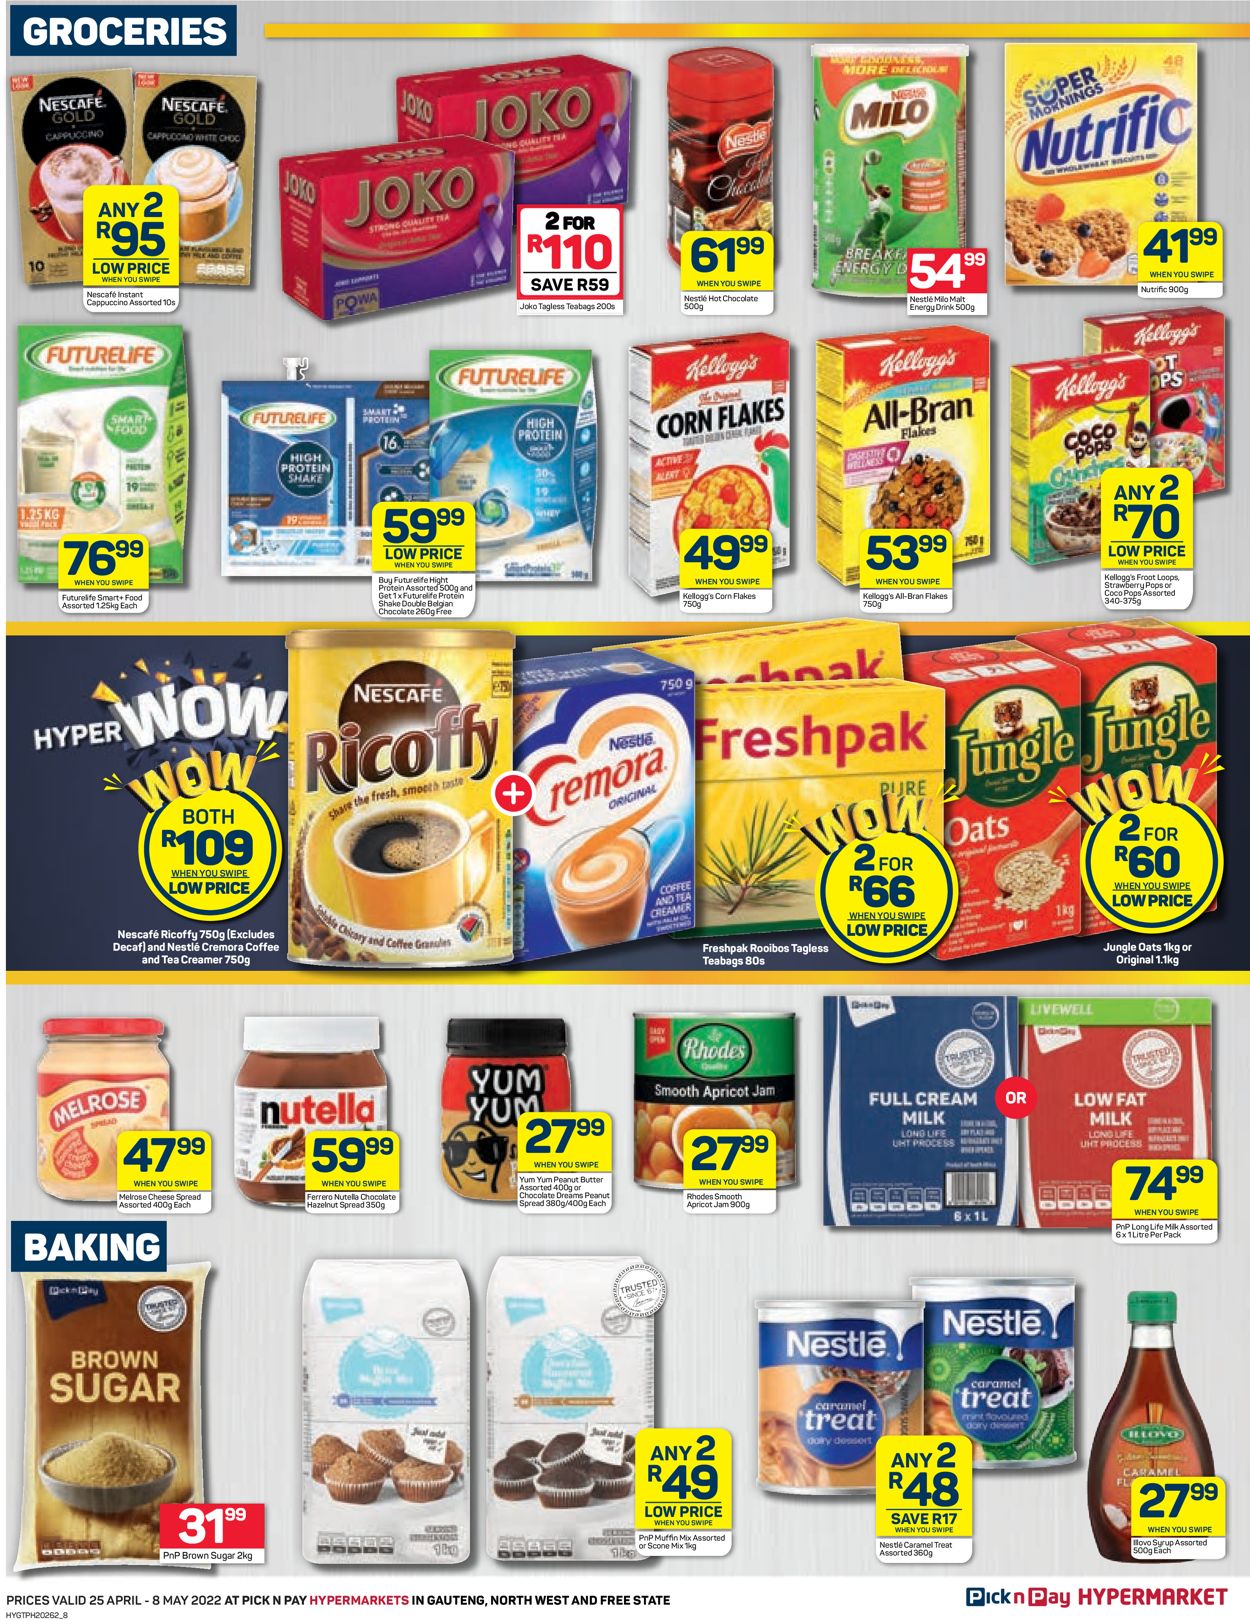 Pick n Pay Catalogue - 2022/04/25-2022/05/08 (Page 8)